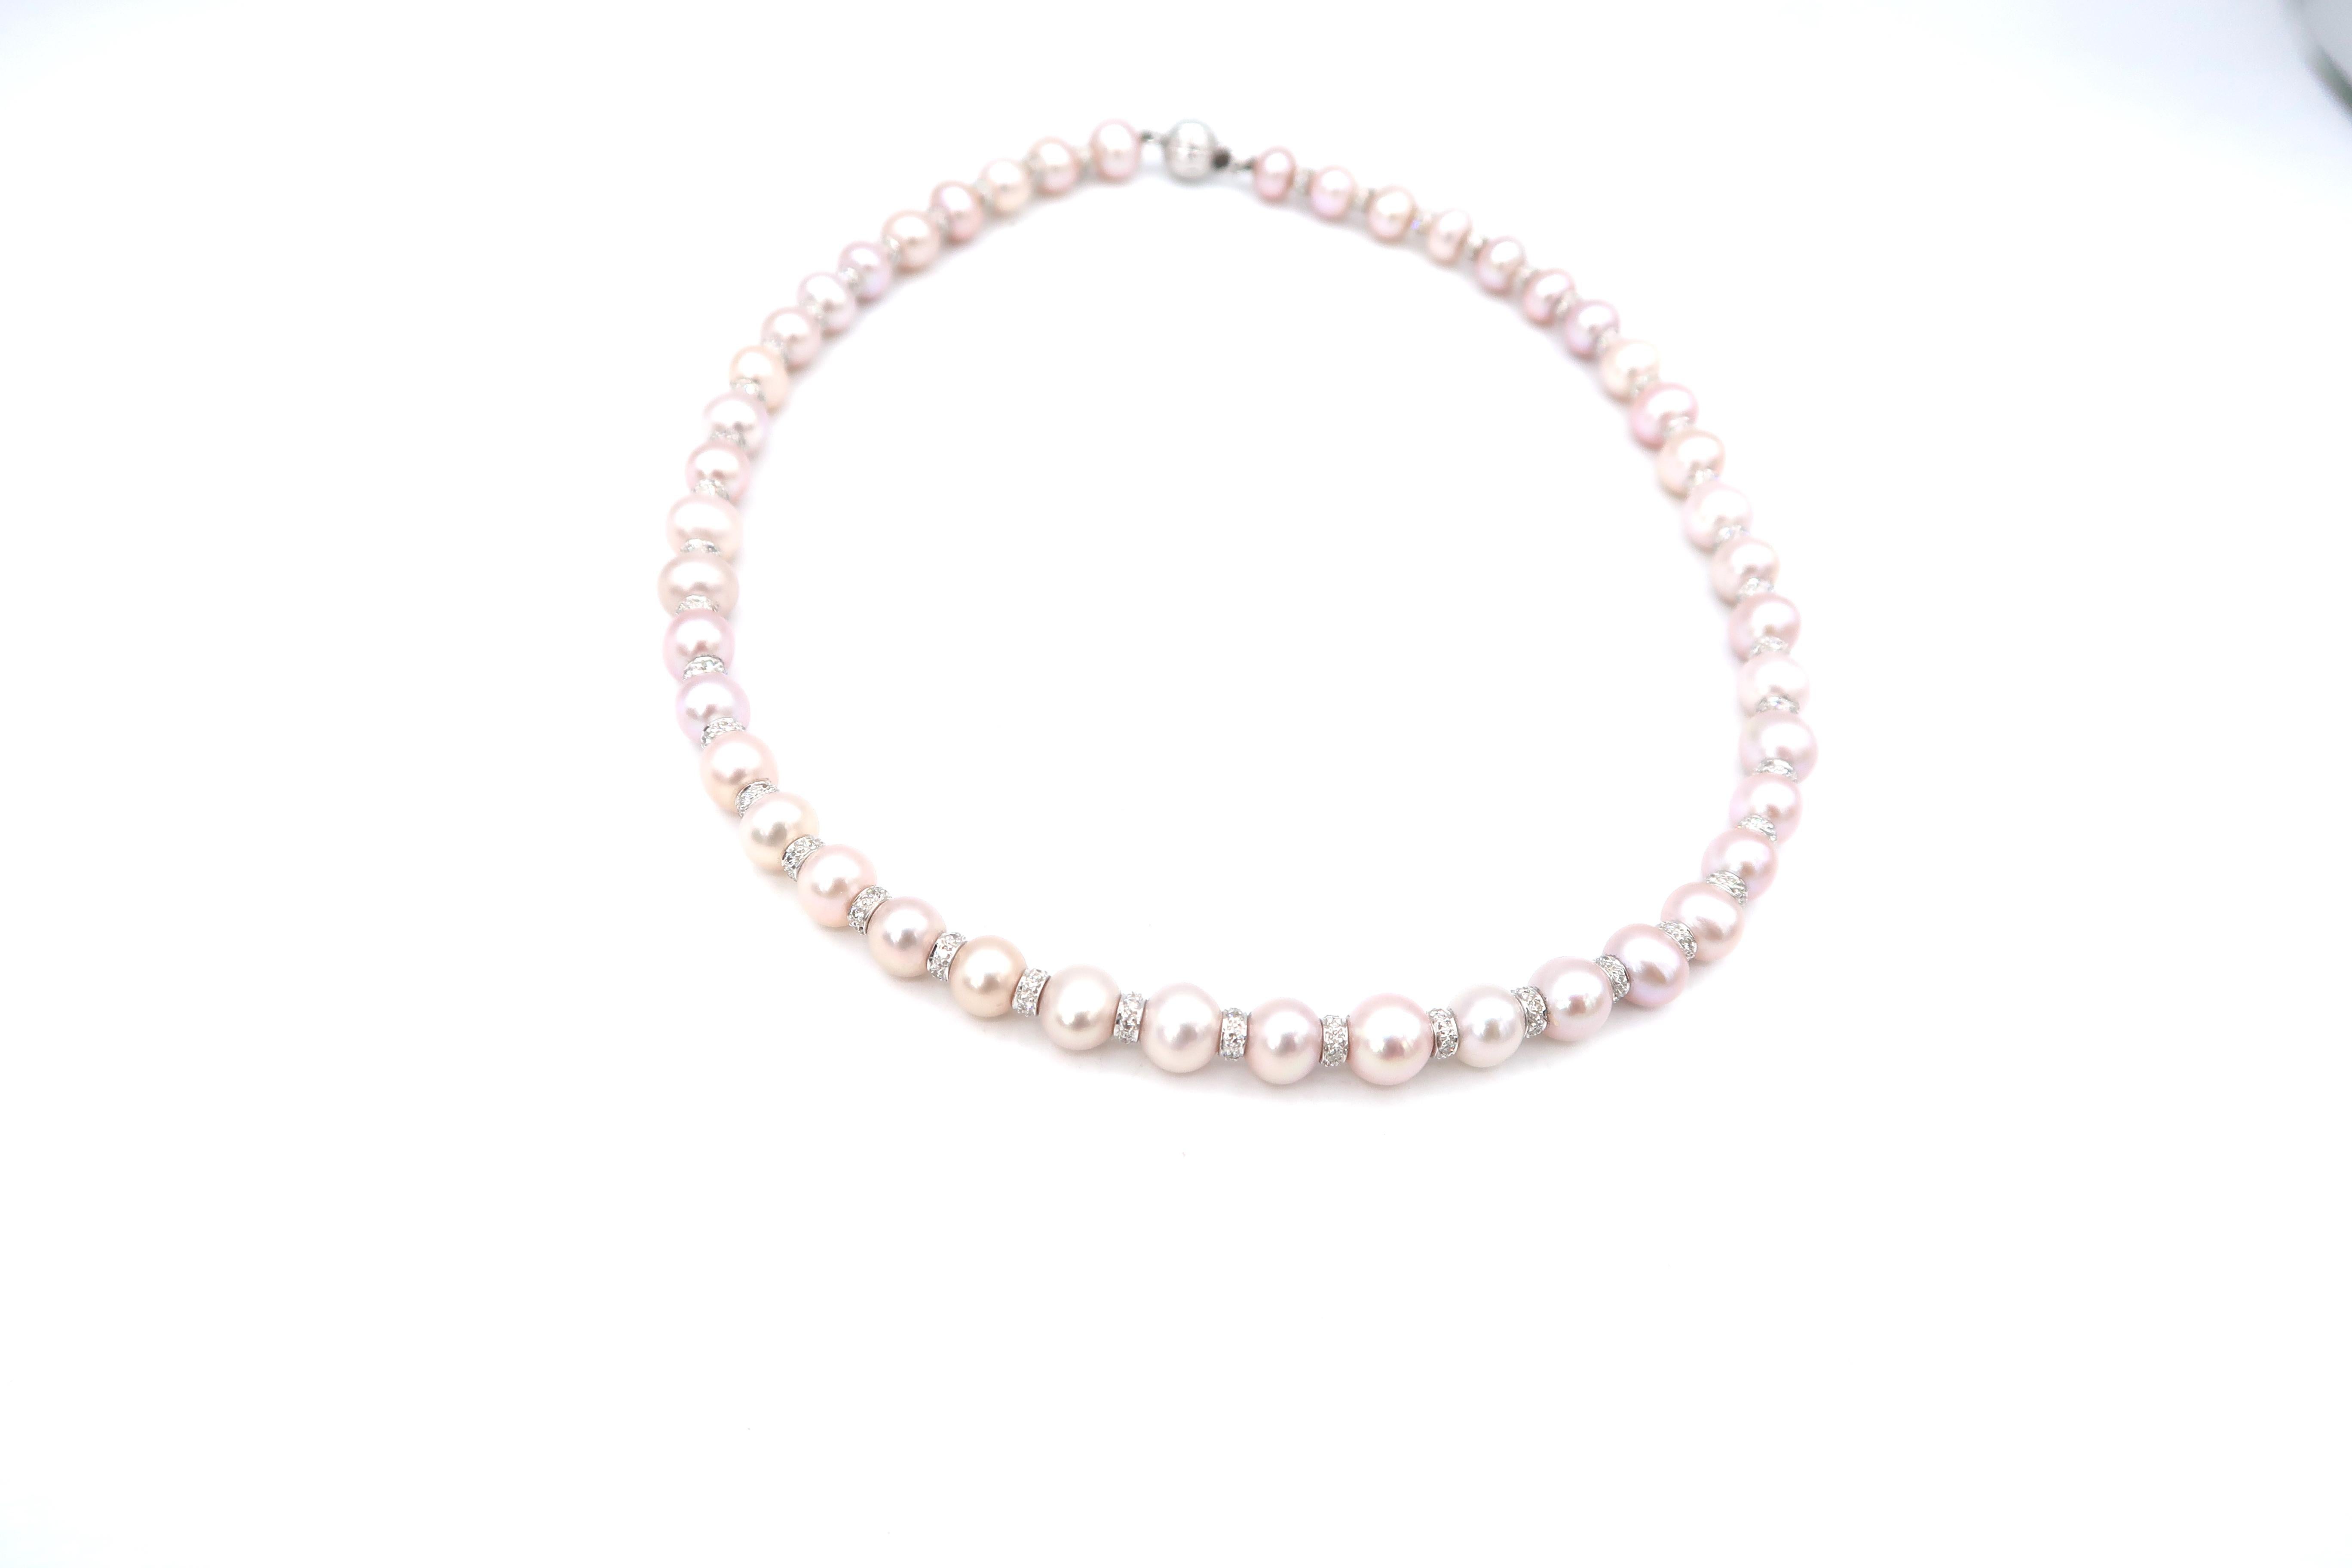 Single Strand Akoya Pink Pearl Necklace with Diamond Spacers in Between

Length: 15.75